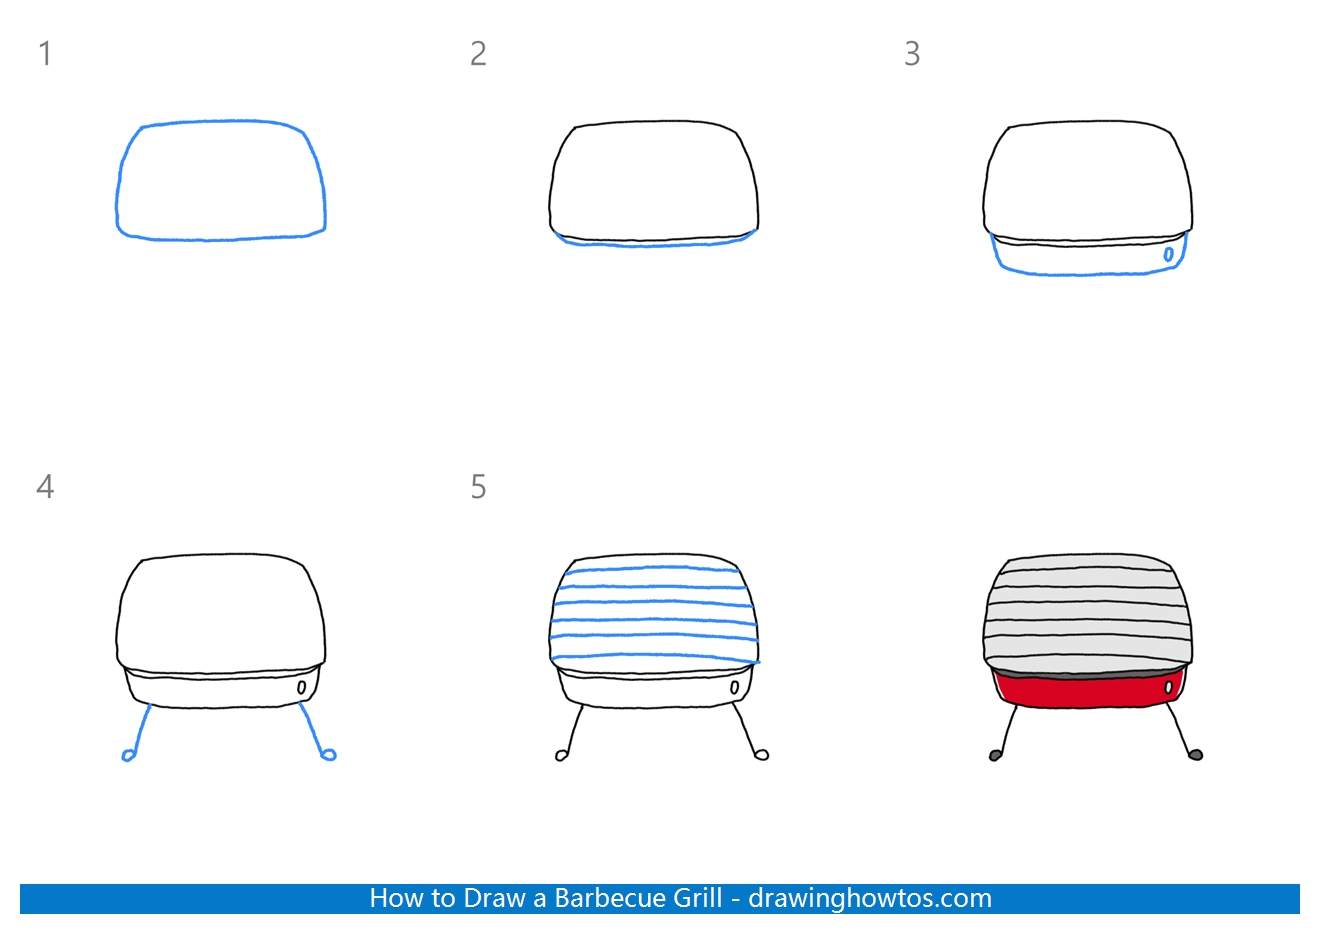 How to Draw a Barbecue Grill Step by Step